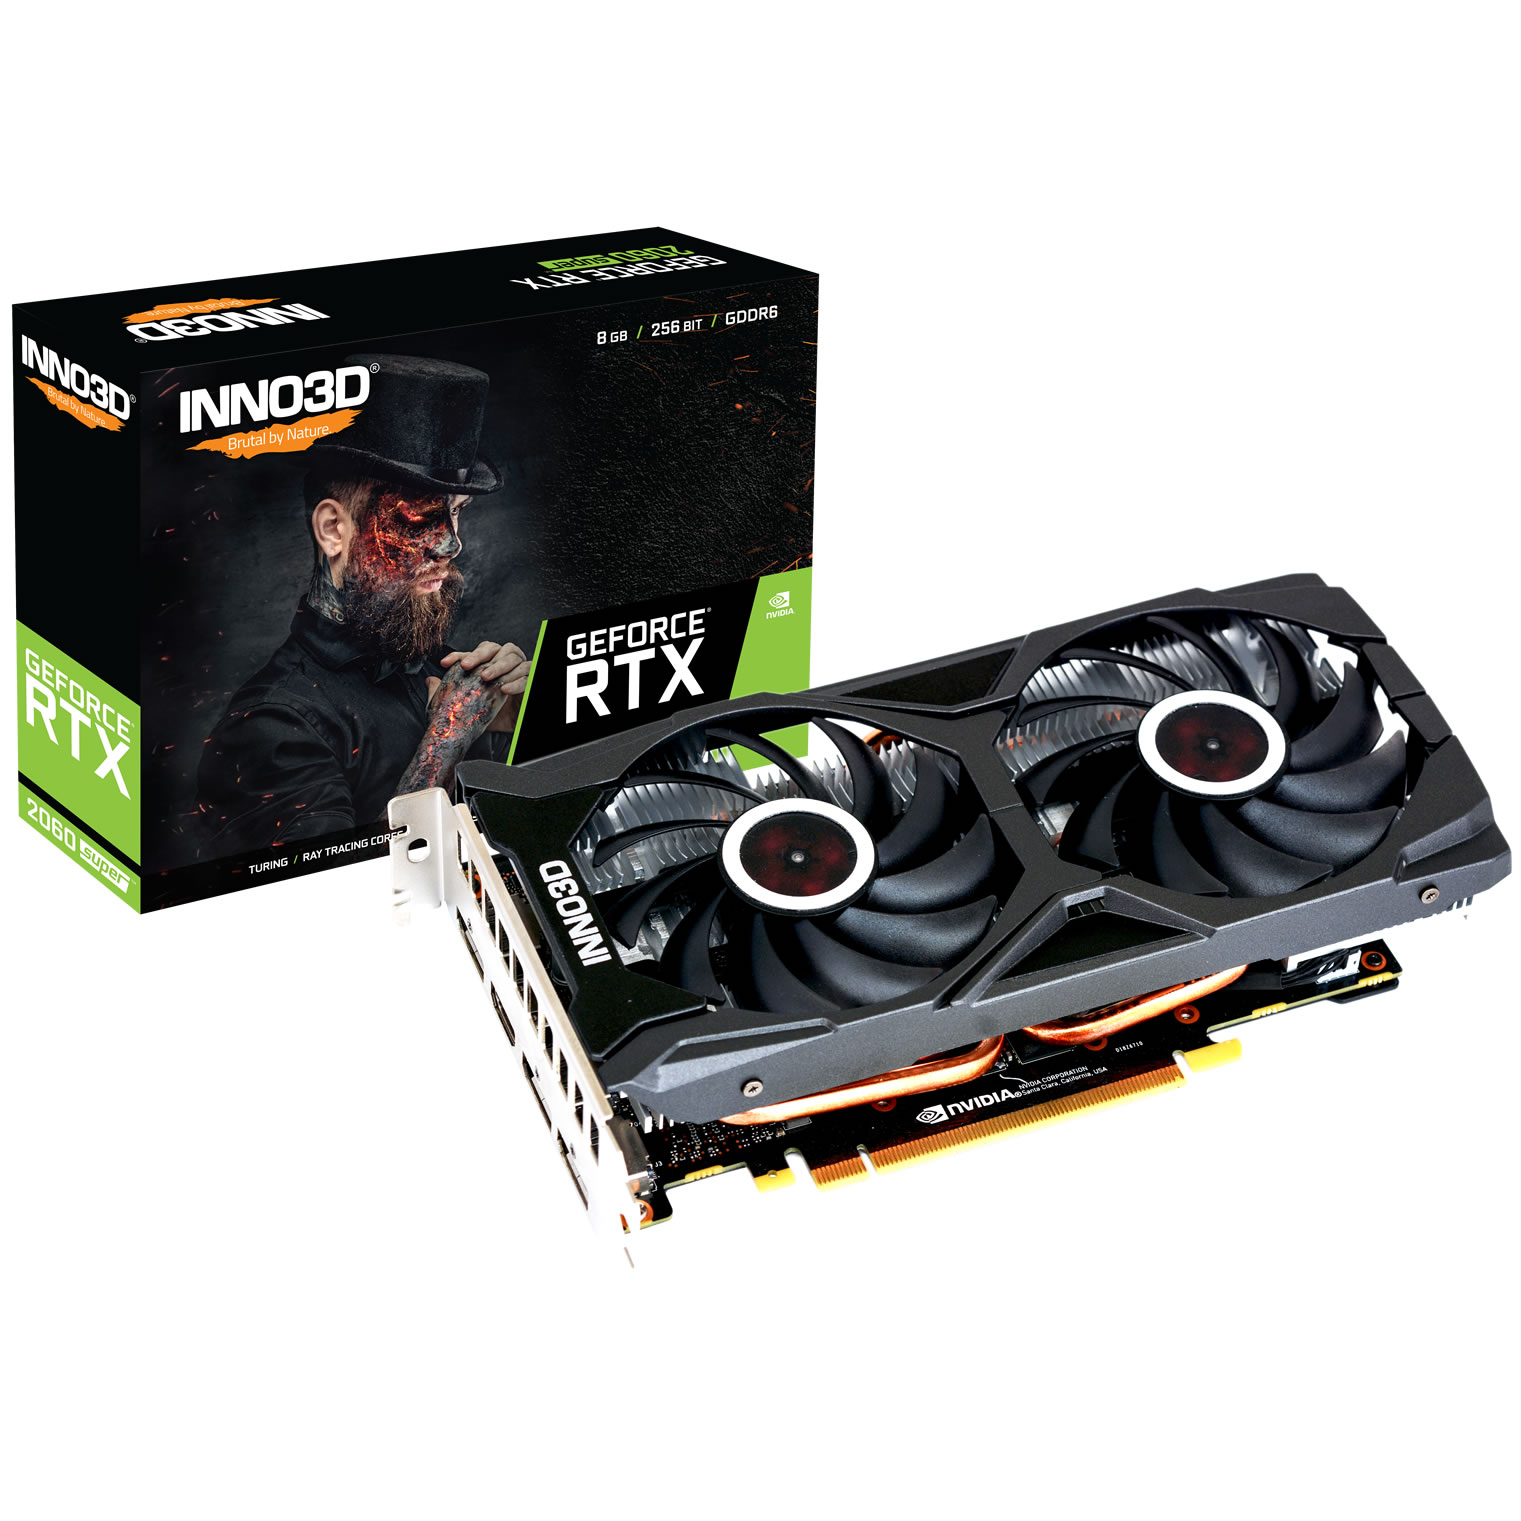 NVIDIA GeForce RTX 2060 Super Graphics Cards at Overclockers